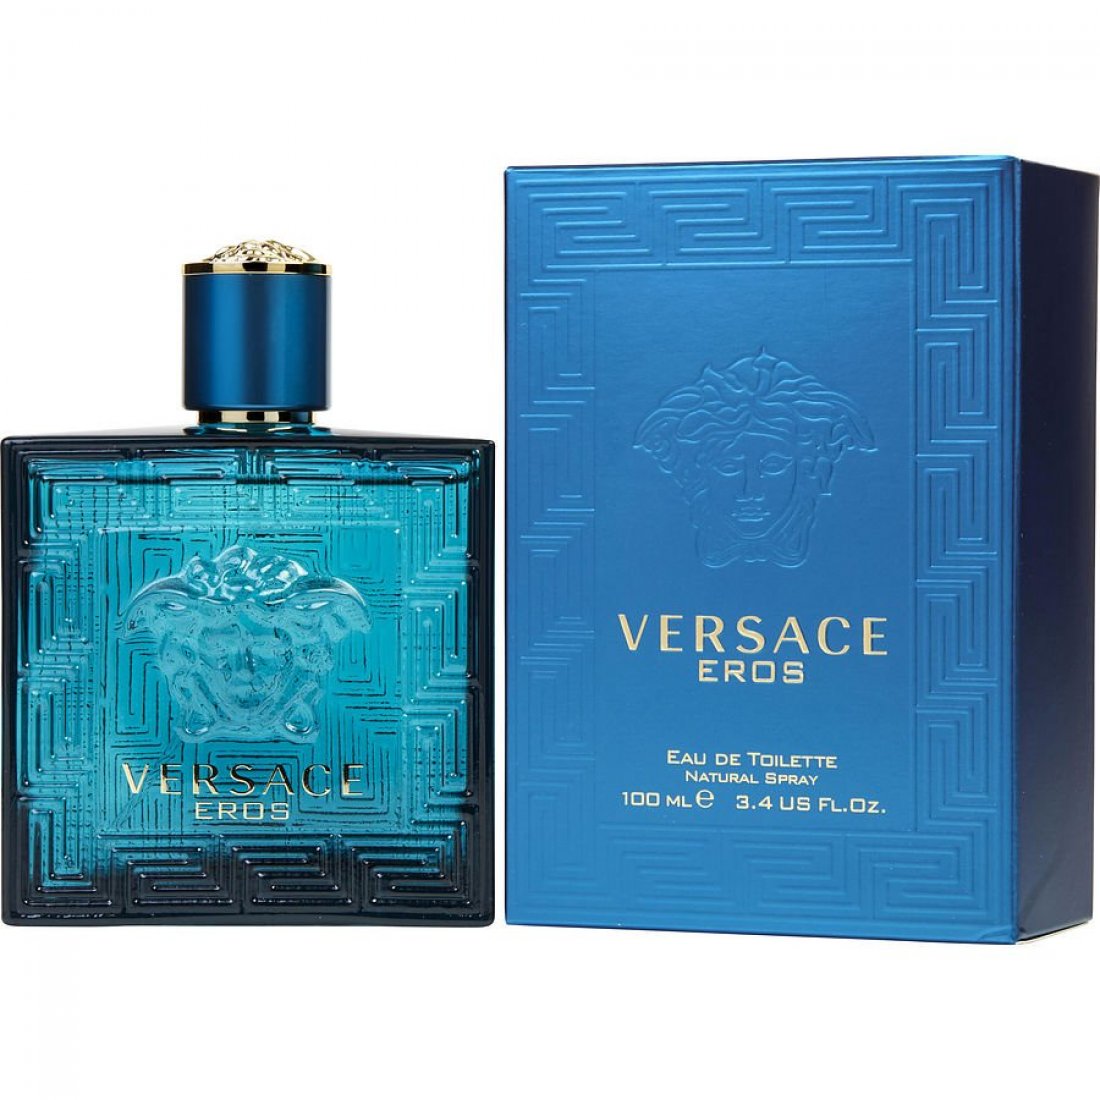 You are currently viewing Decadent Fragrance Versace Eros Perfume Review